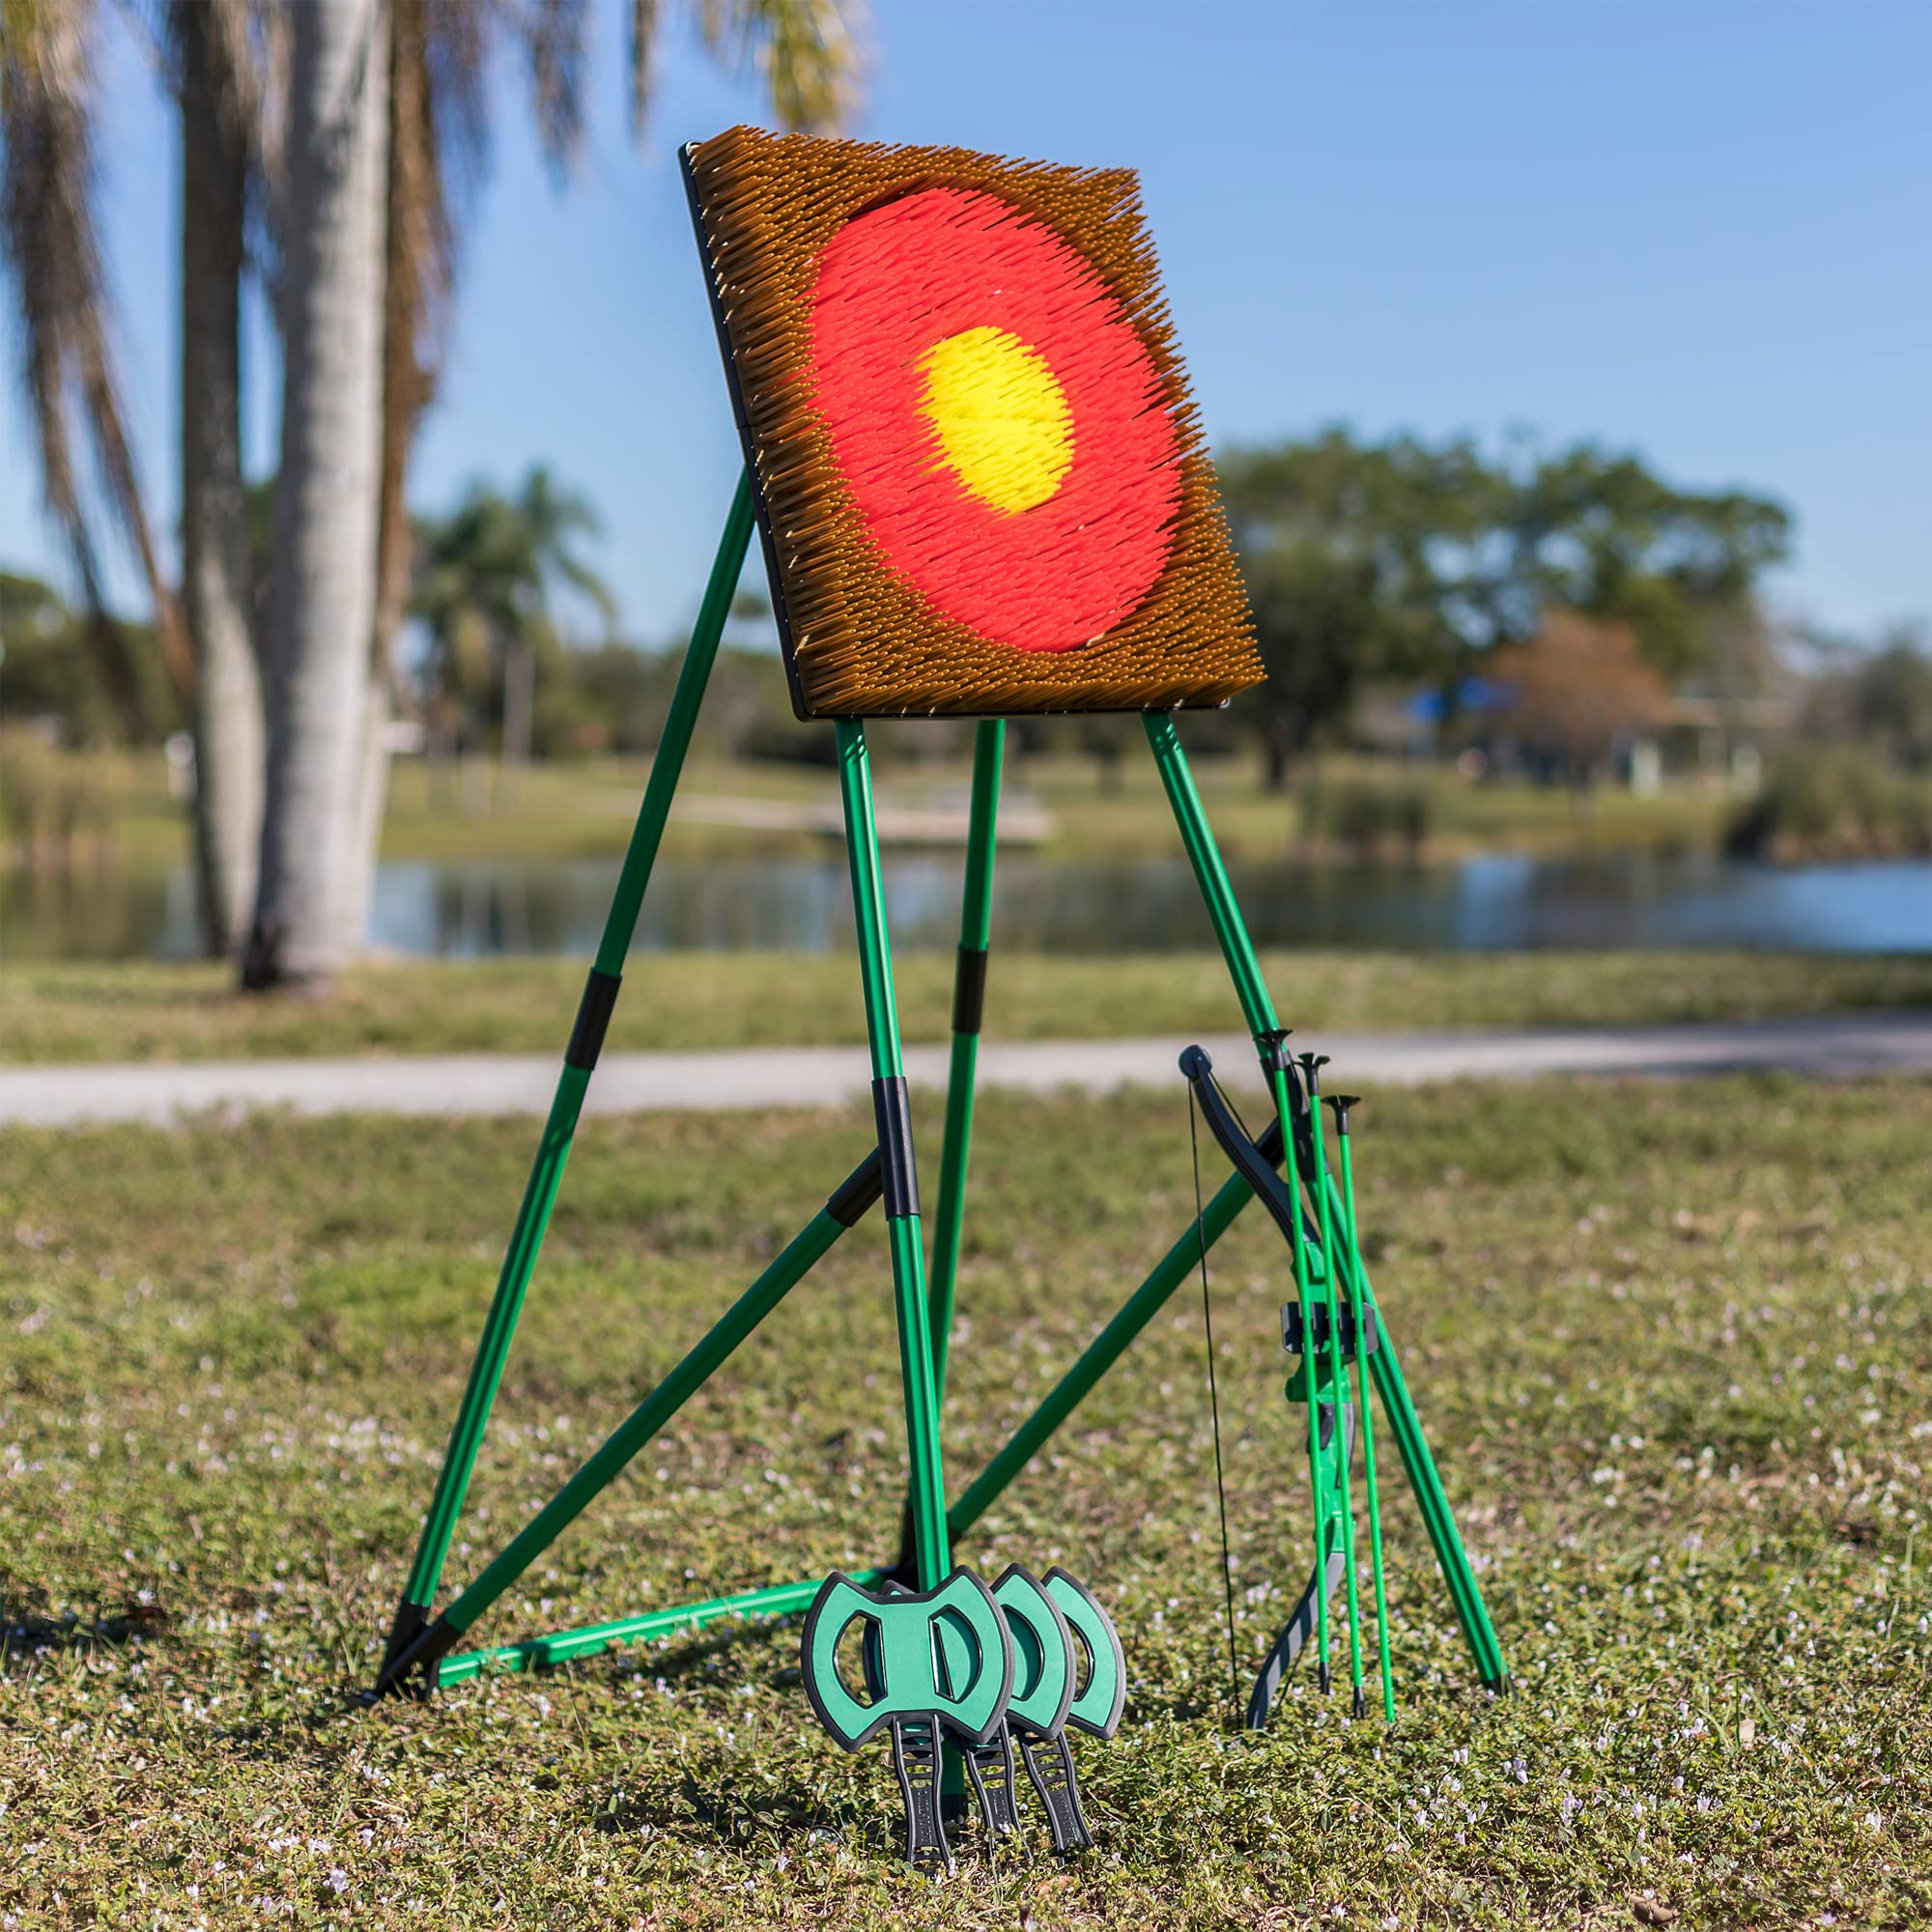 Go! Gater EastPoint Sports 2-in-1 Tomahawk Toss & Archery Game Set – Includes Tomahawks and Arrows with Bristle Target for The Backyard, Park, Indoors and Outdoors